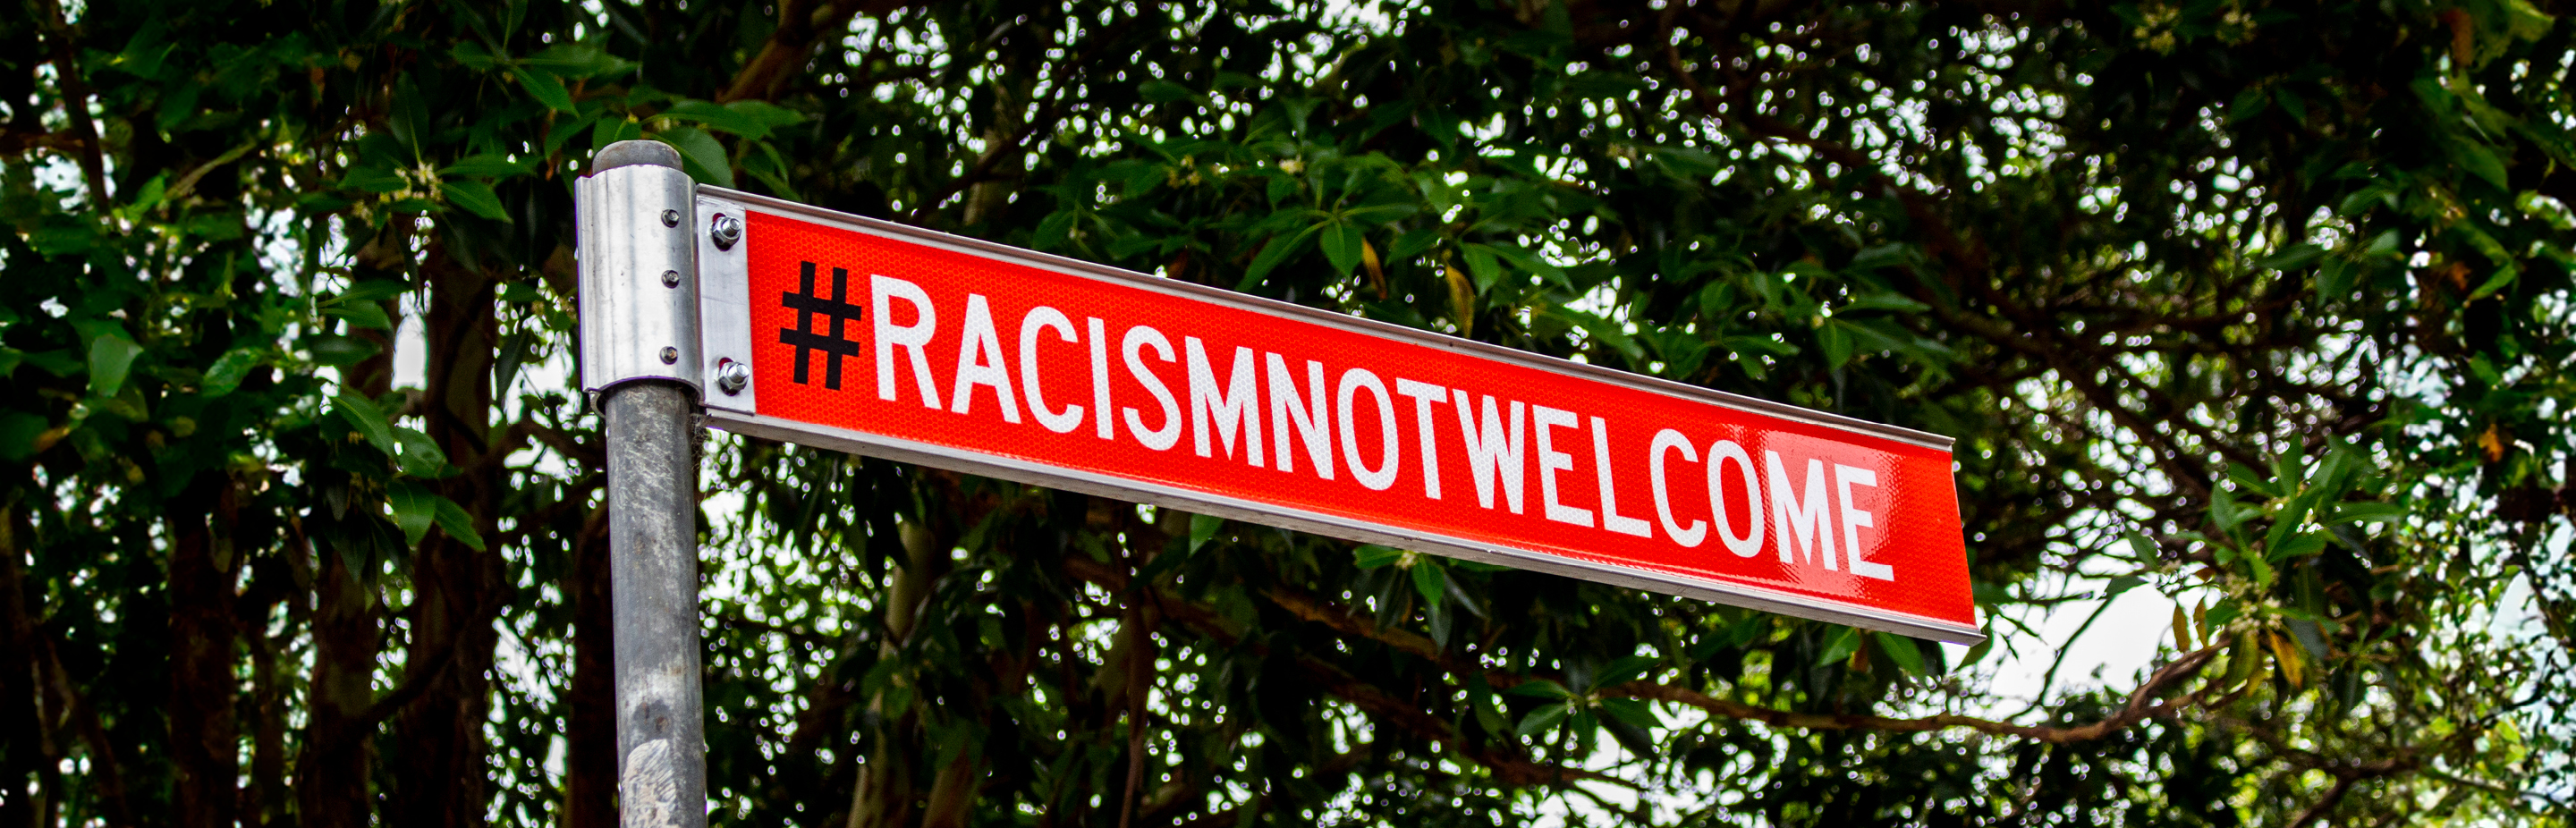 Red street sign that reads "Racism not welcome"